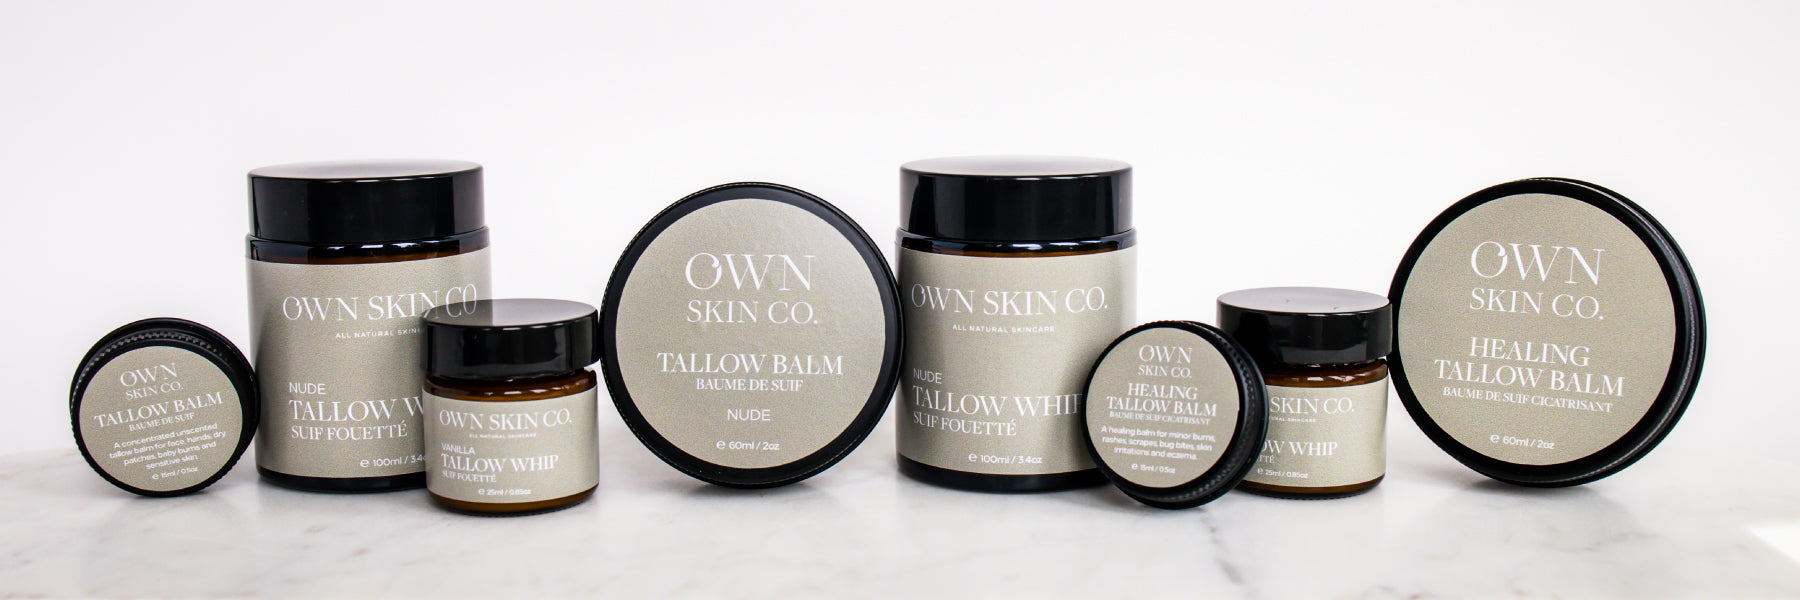 OWN SKIN CO Canadian Tallow Skincare and Moisturizers